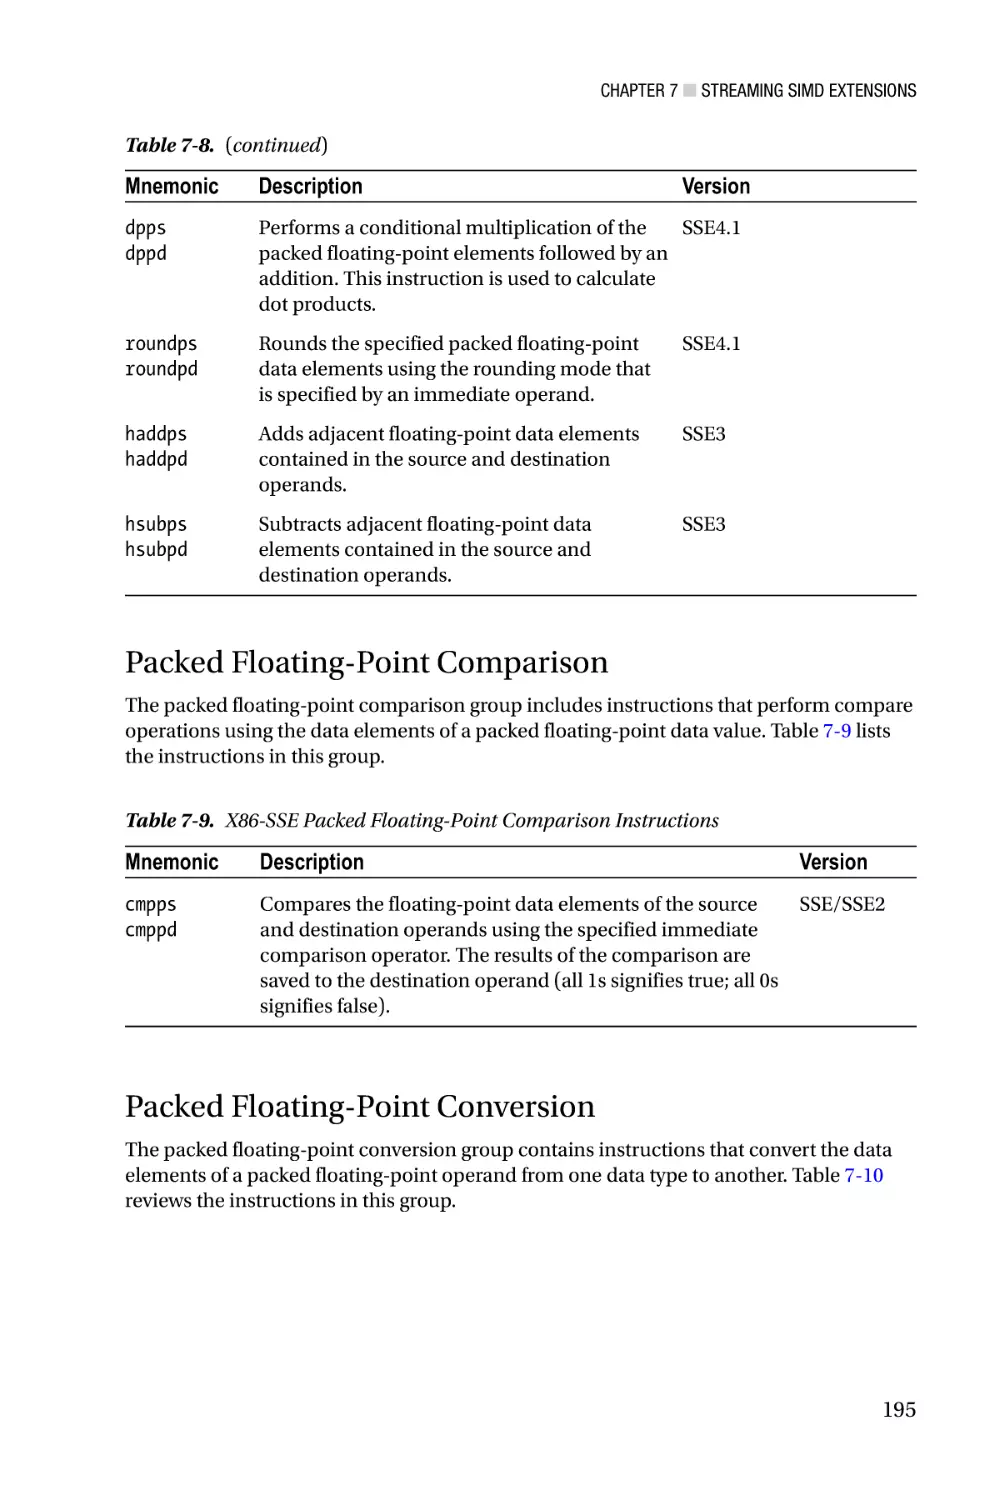 Packed Floating-Point Comparison
Packed Floating-Point Conversion